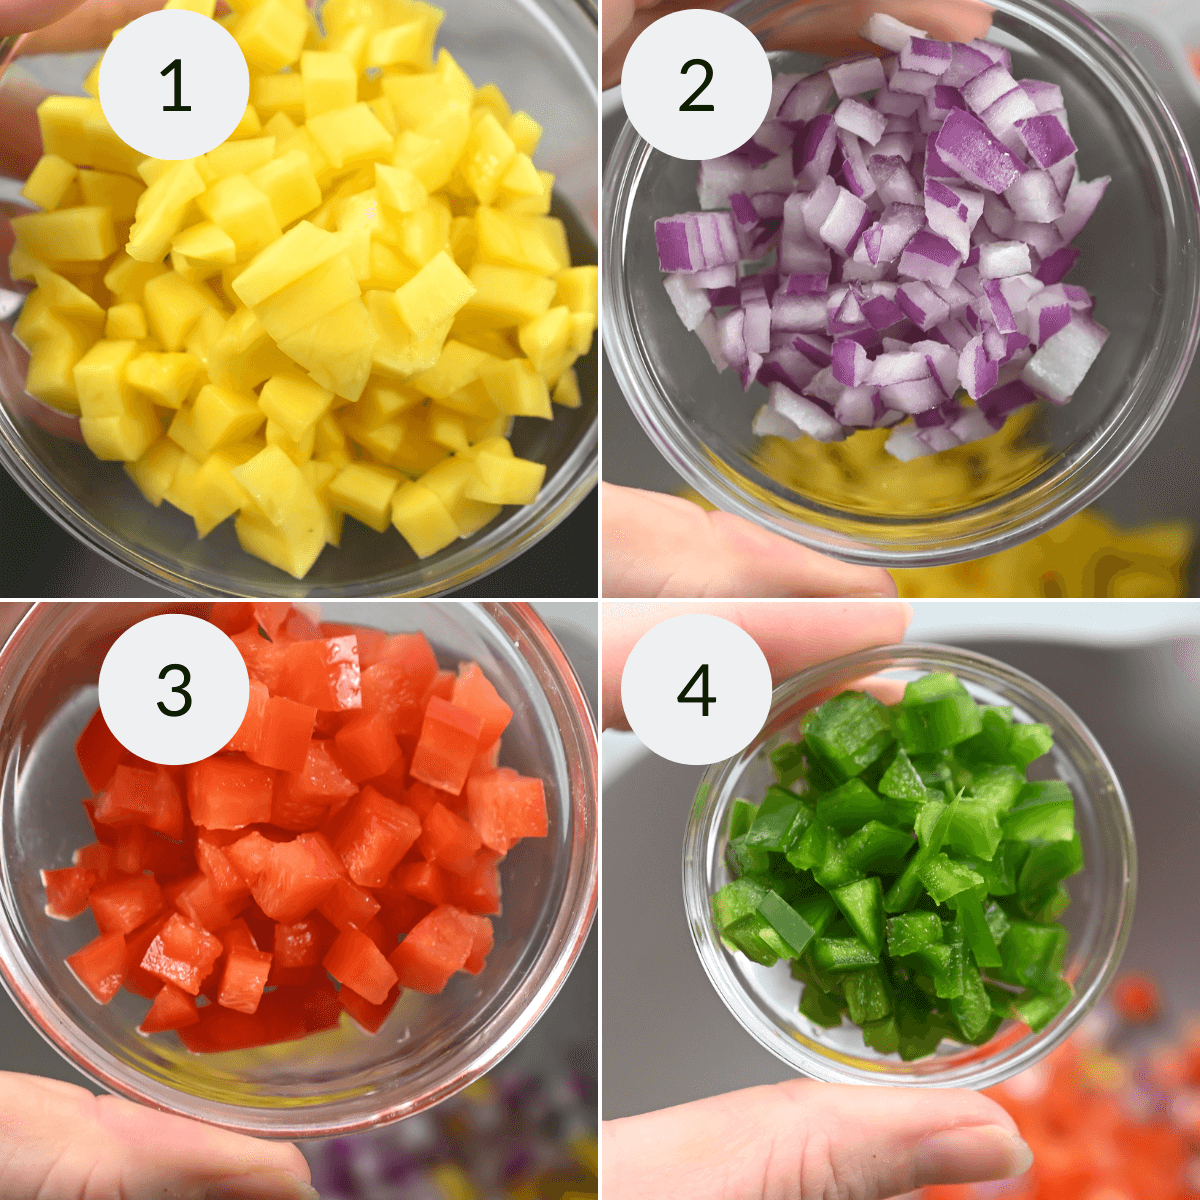 Four bowls containing different chopped vegetables: diced yellow squash, red onion, red bell pepper, and green bell pepper mixed with mango habanero salsa, numbered 1 through 4 respectively.